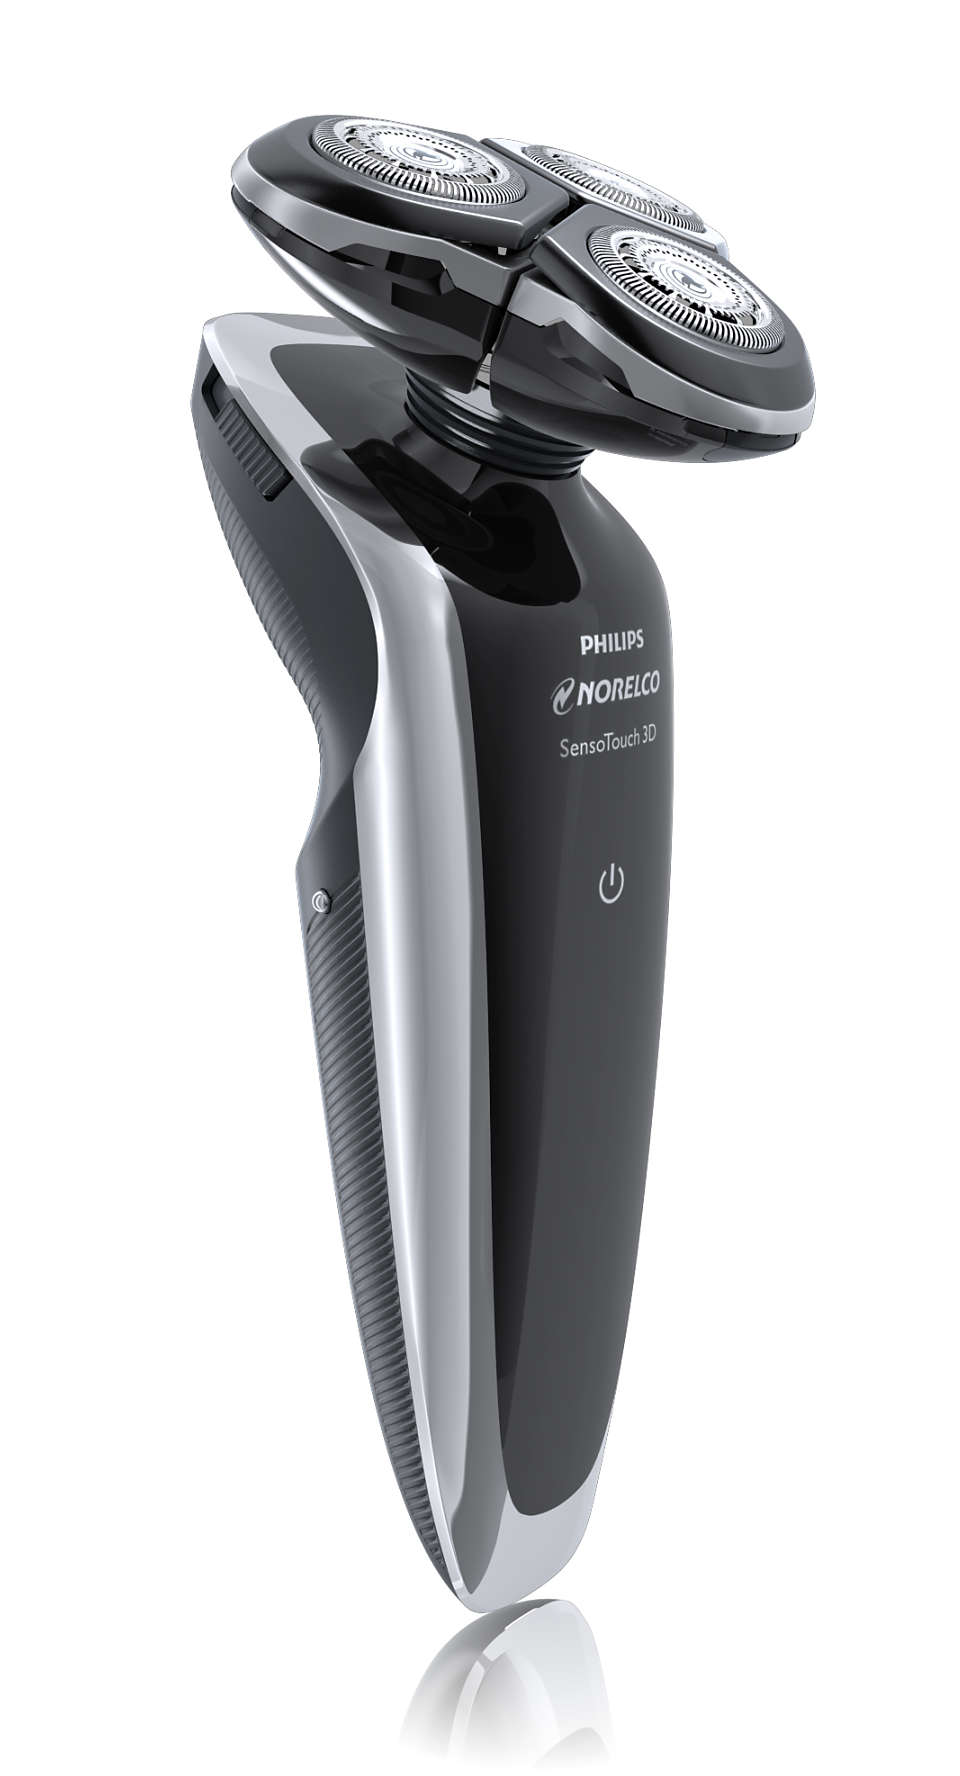 Series 8000 - Ultimate shaving experience